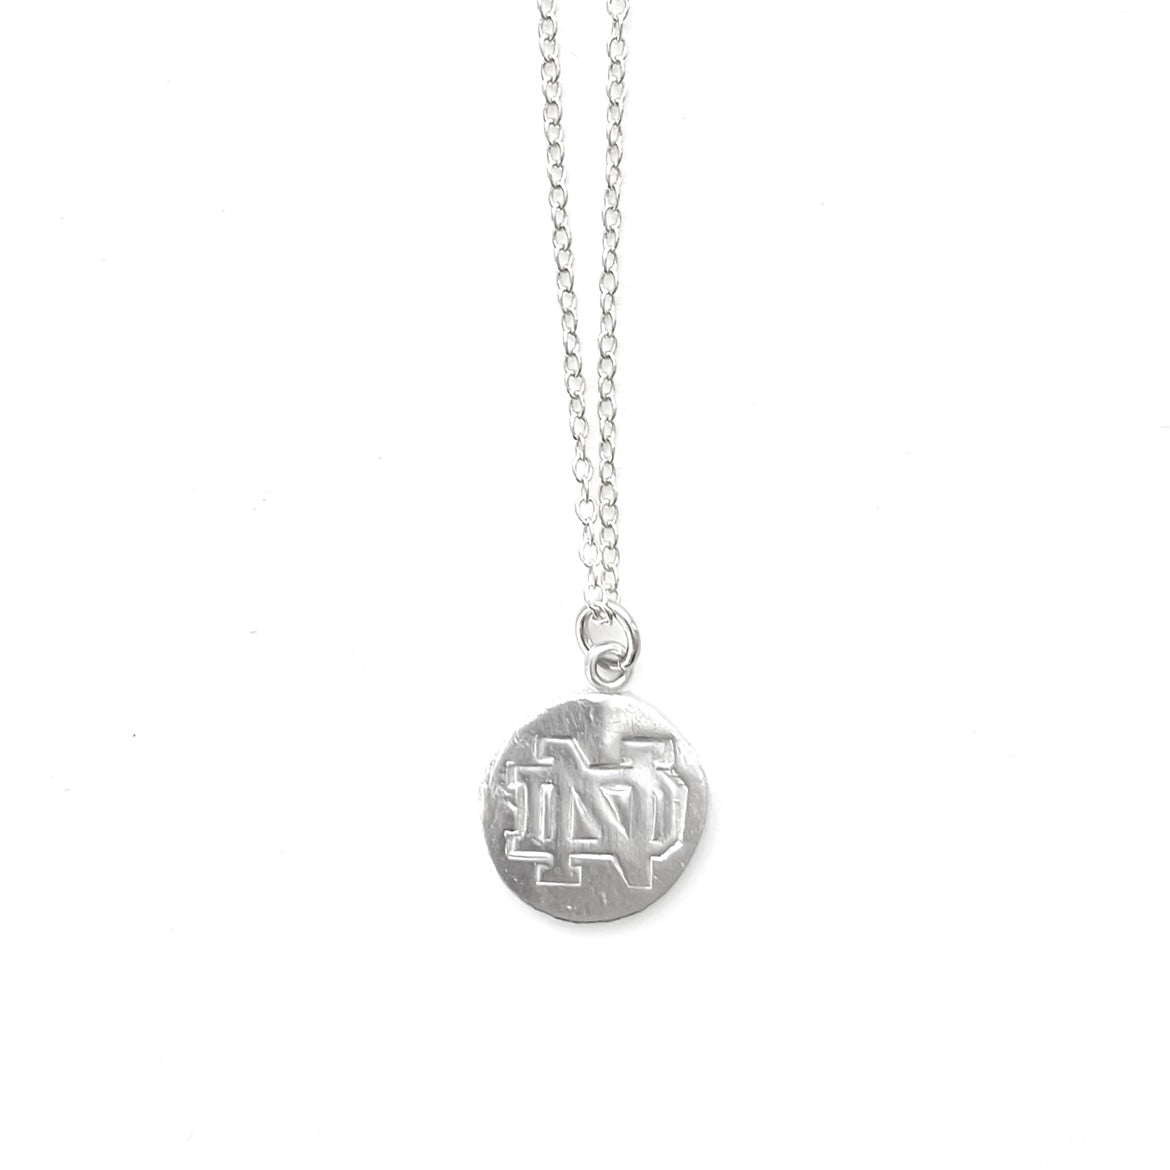 ND Charm Necklace Silver